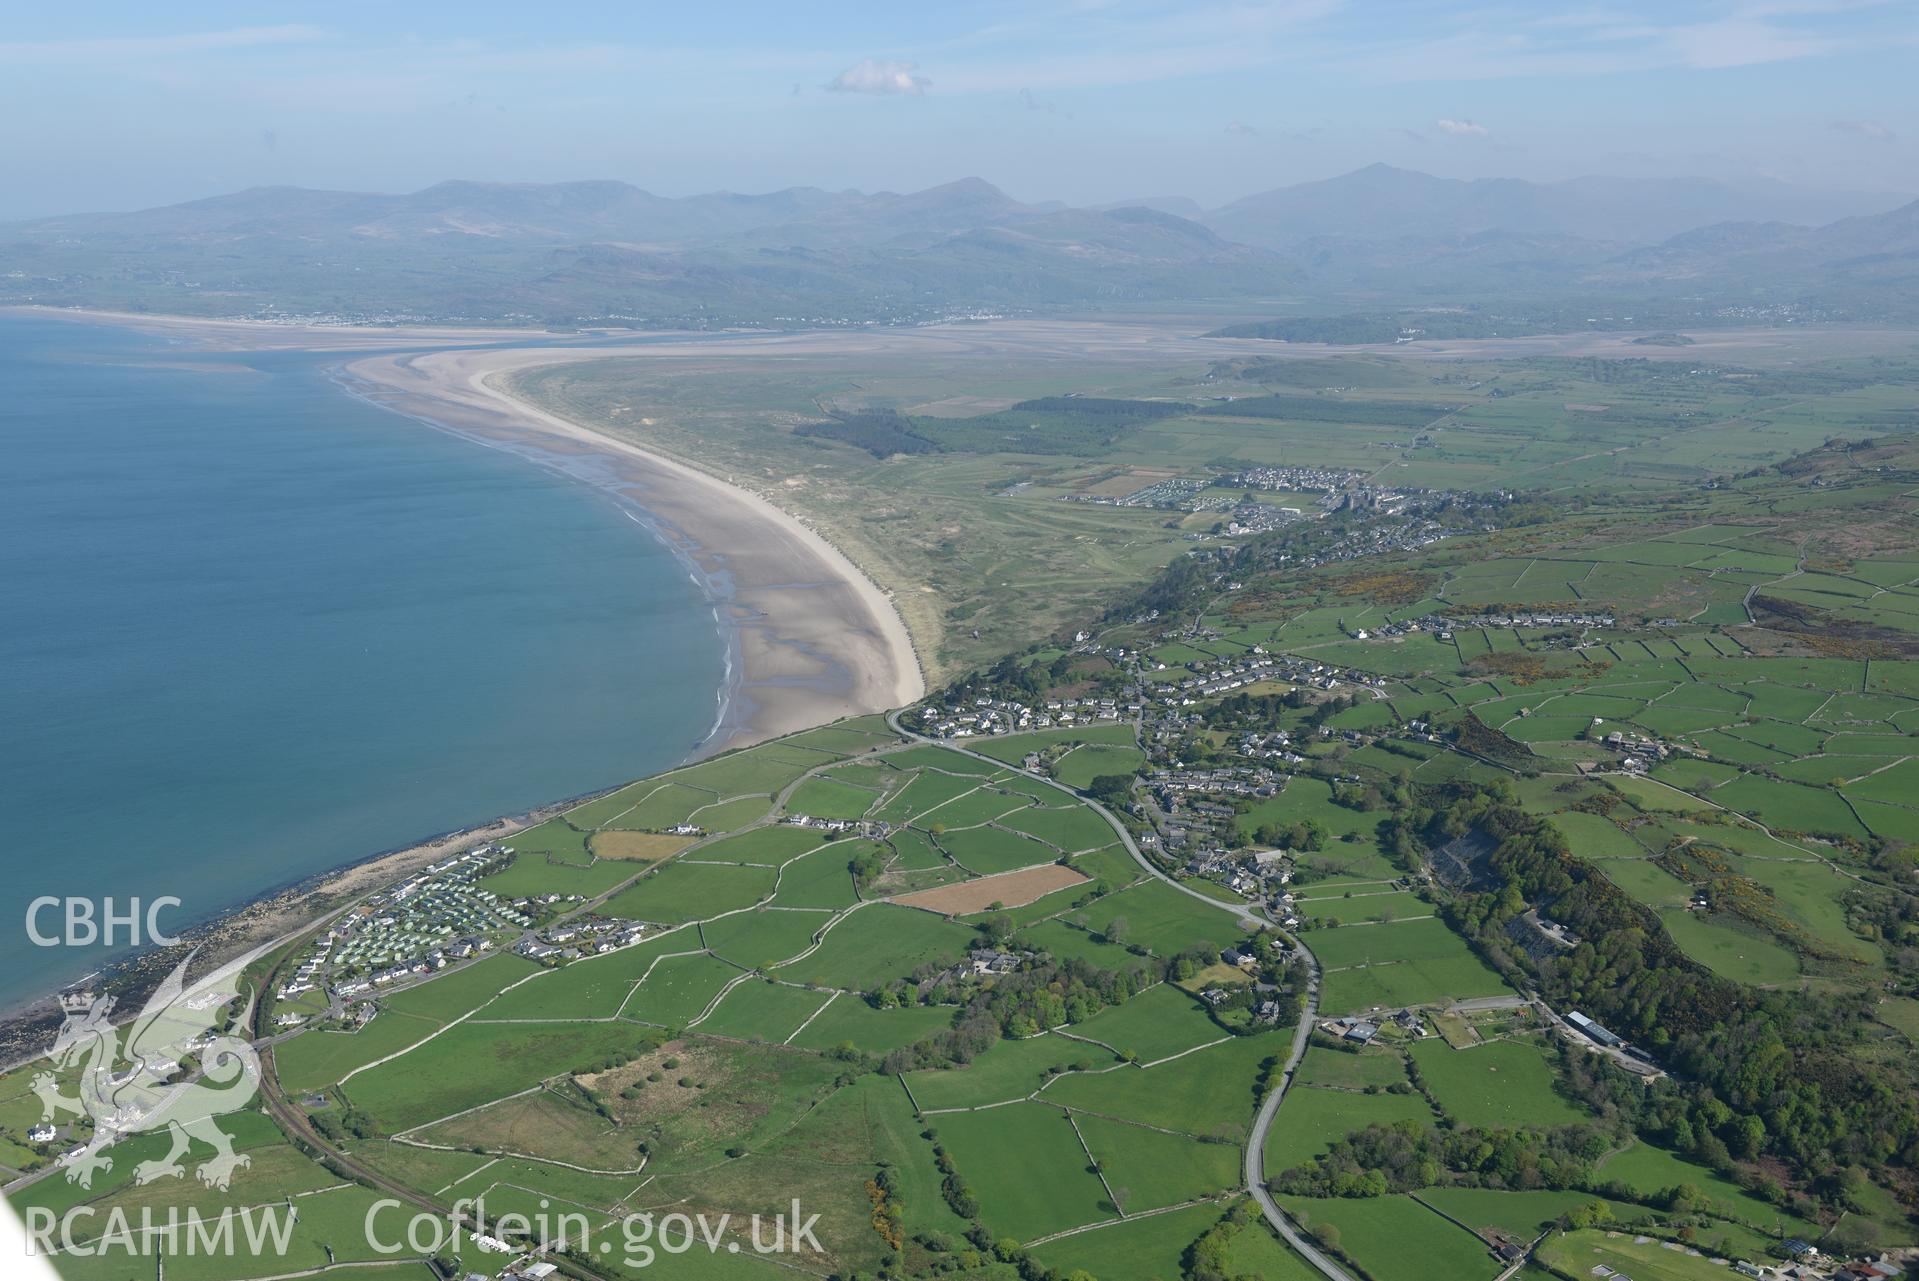 Aerial photography of Harlech taken on 3rd May 2017.  Baseline aerial reconnaissance survey for the CHERISH Project. ? Crown: CHERISH PROJECT 2017. Produced with EU funds through the Ireland Wales Co-operation Programme 2014-2020. All material made freel